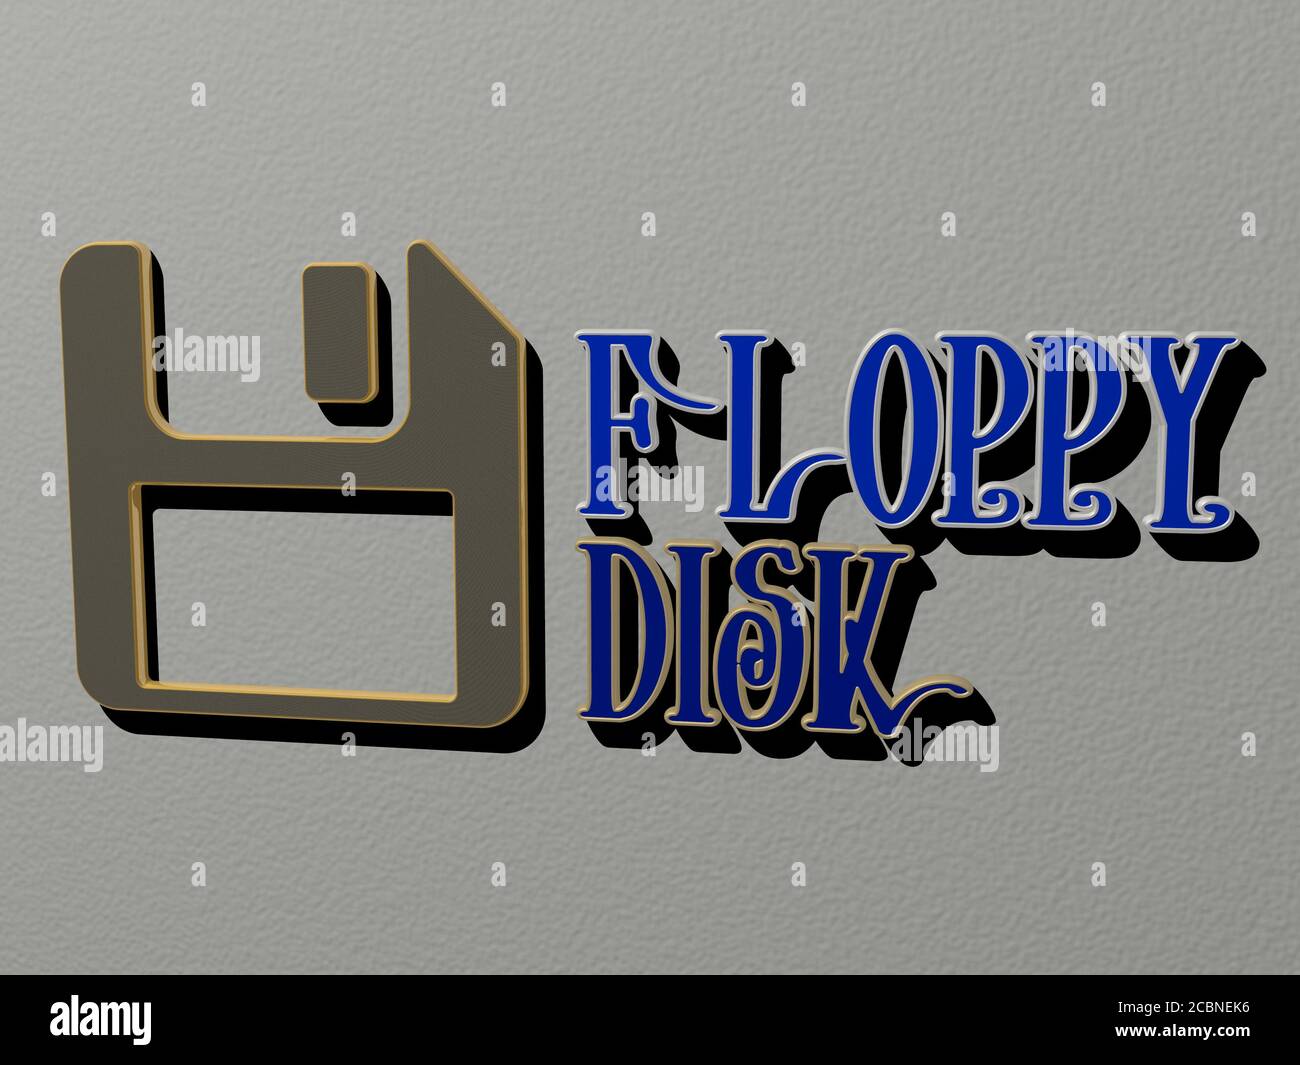 FLOPPY DISK icon and text on the wall, 3D illustration for computer and background Stock Photo